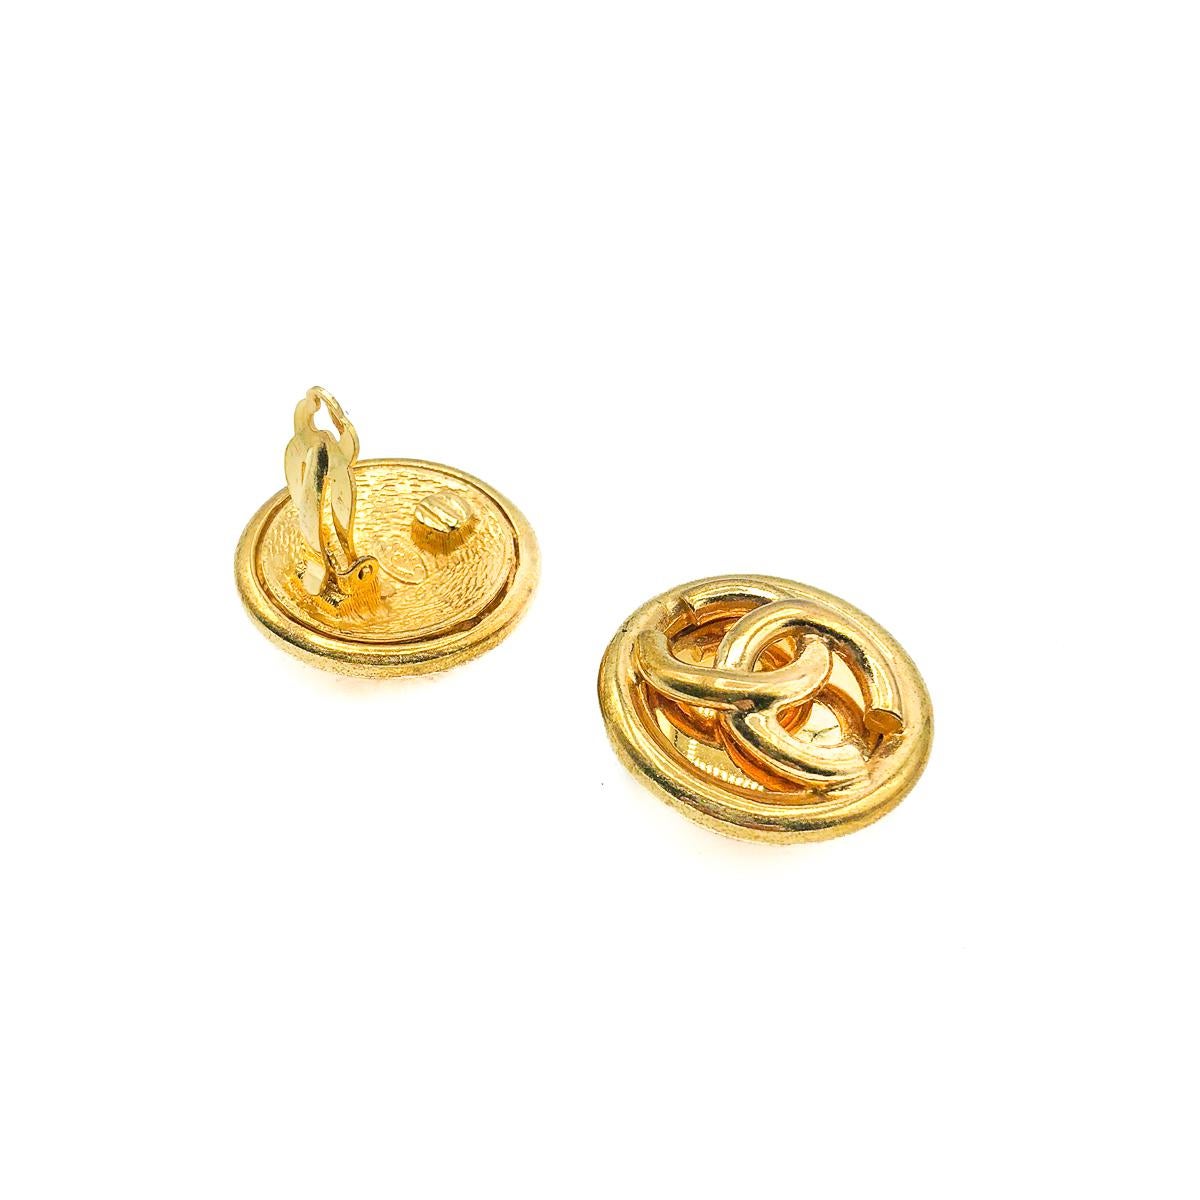 A stunning pair of large clip on Vintage Chanel CC Earrings. Crafted from gold plated metal. Featuring a luxurious tubular style design with the iconic CC logo as the main event. In very good vintage condition, signed and dated to the 1993 Spring